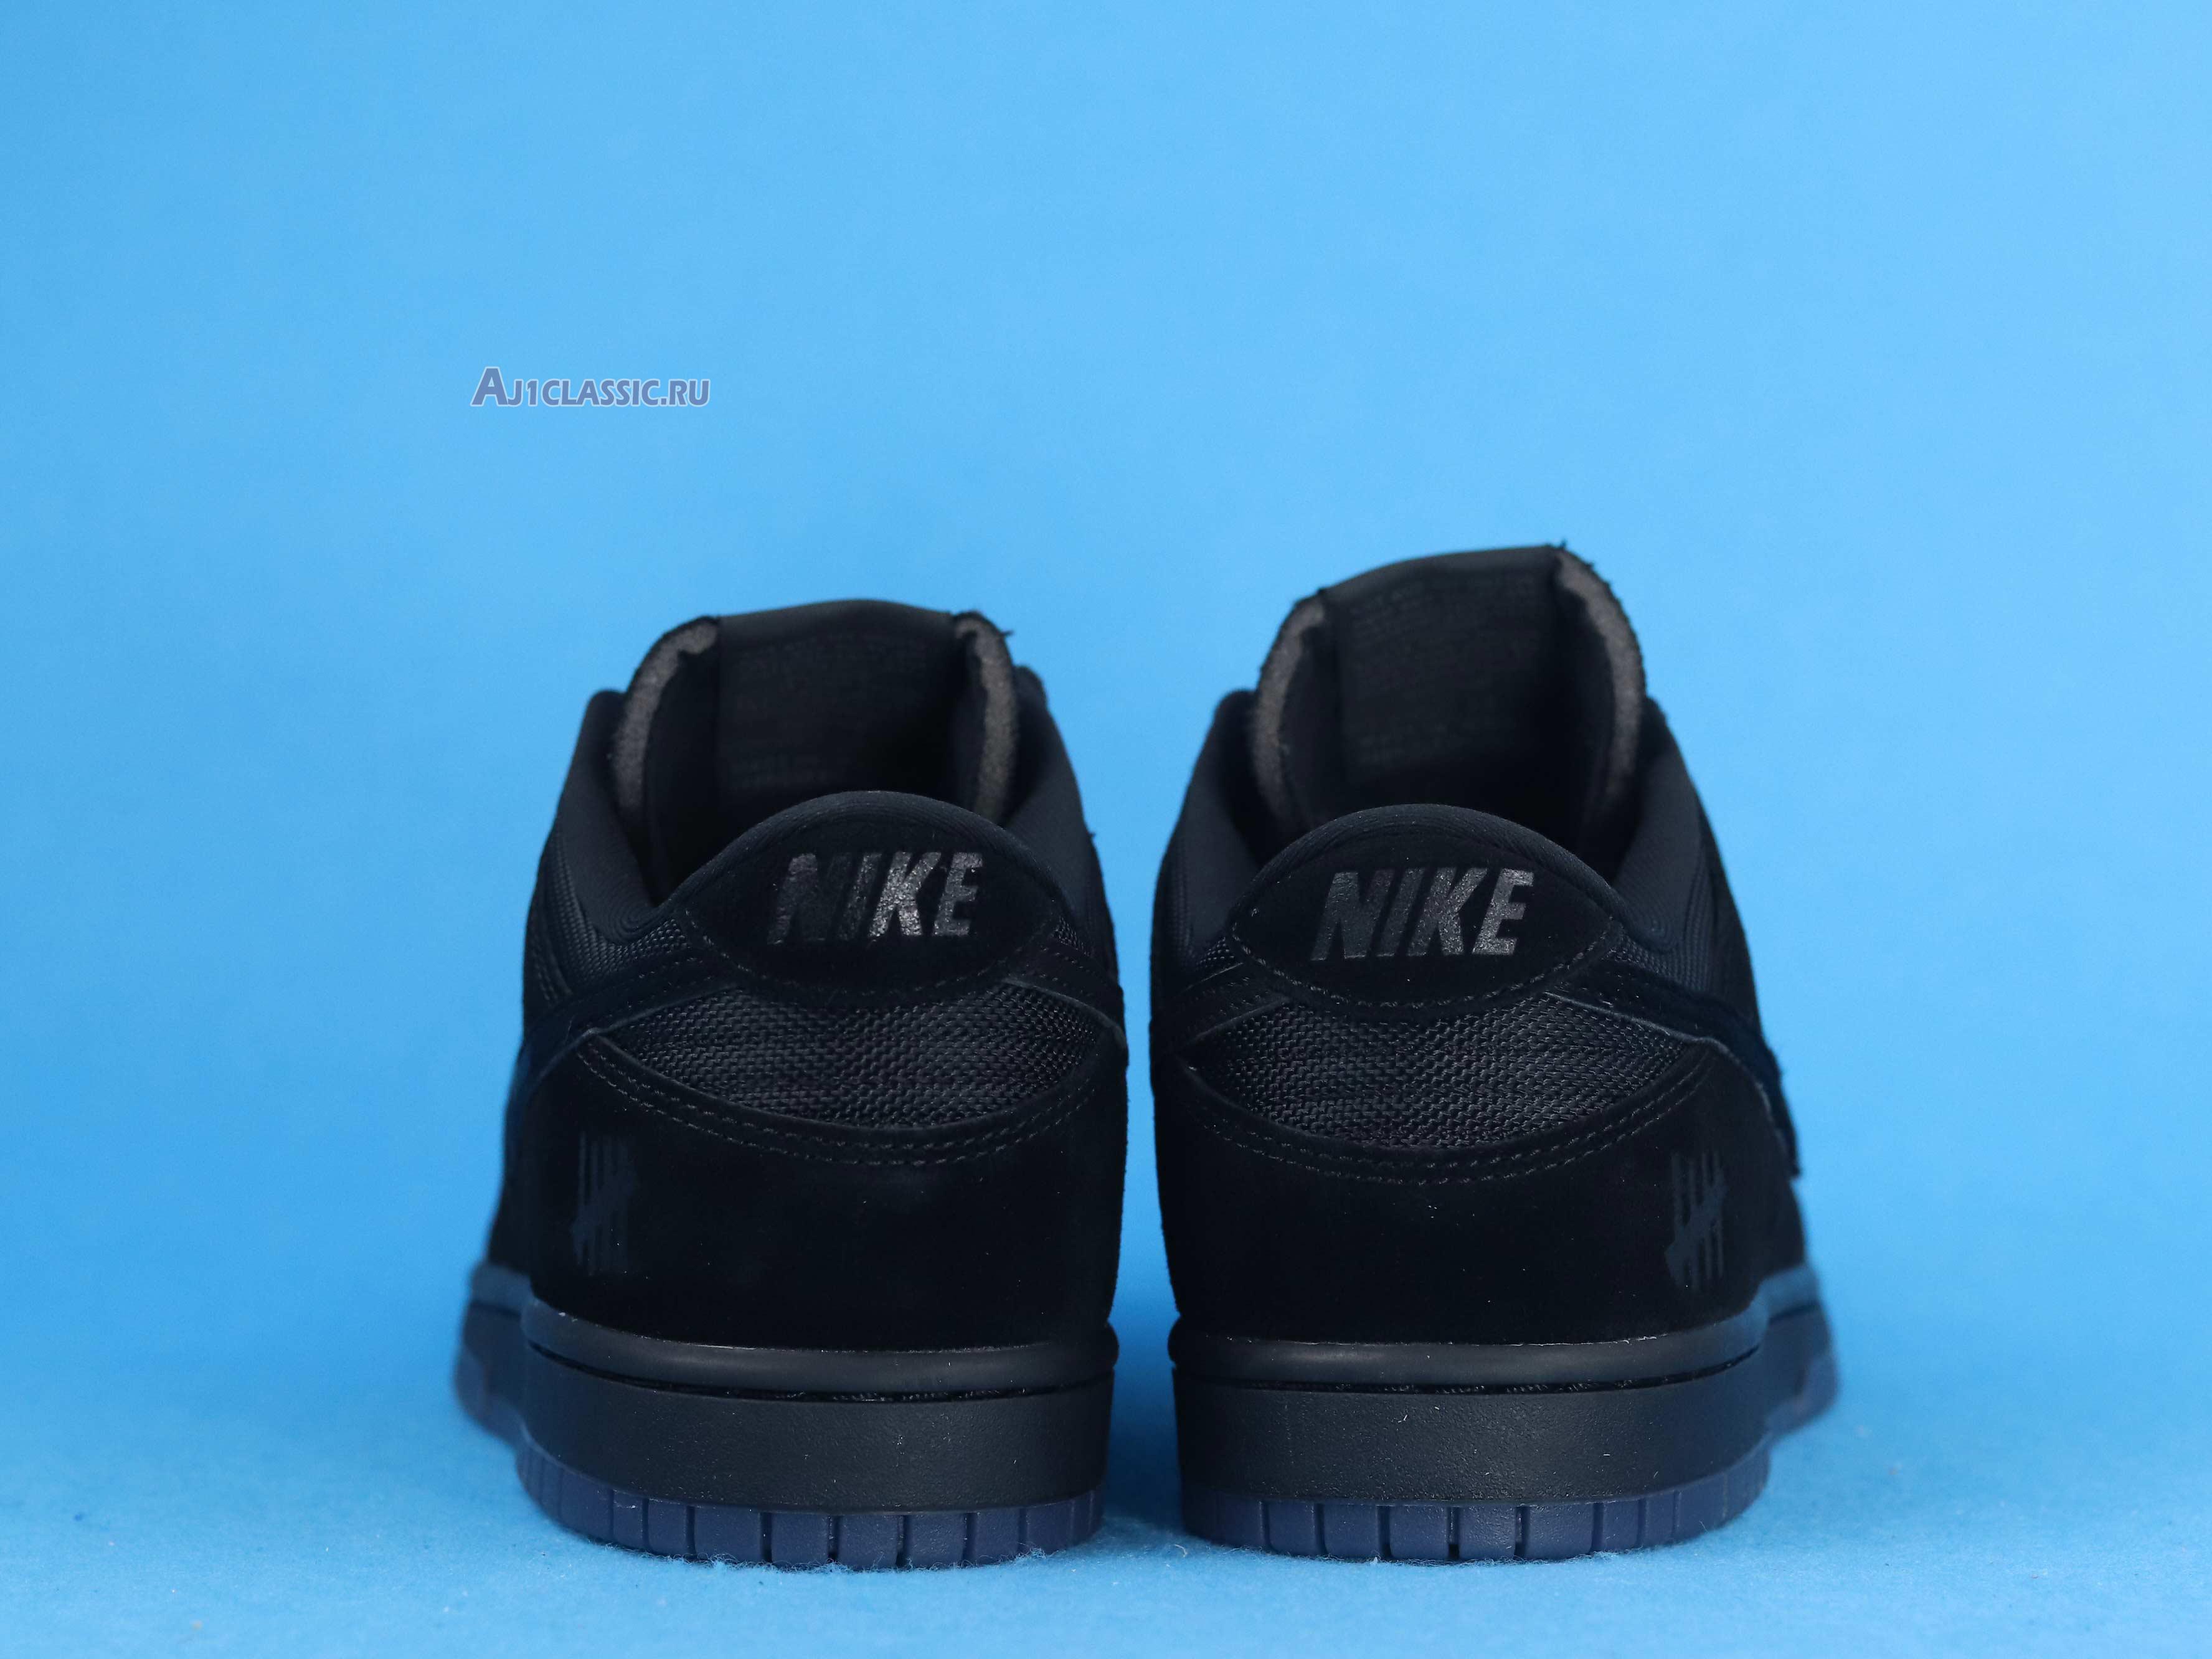 Undefeated x Nike Dunk Low "Dunk vs AF1" DO9329-001